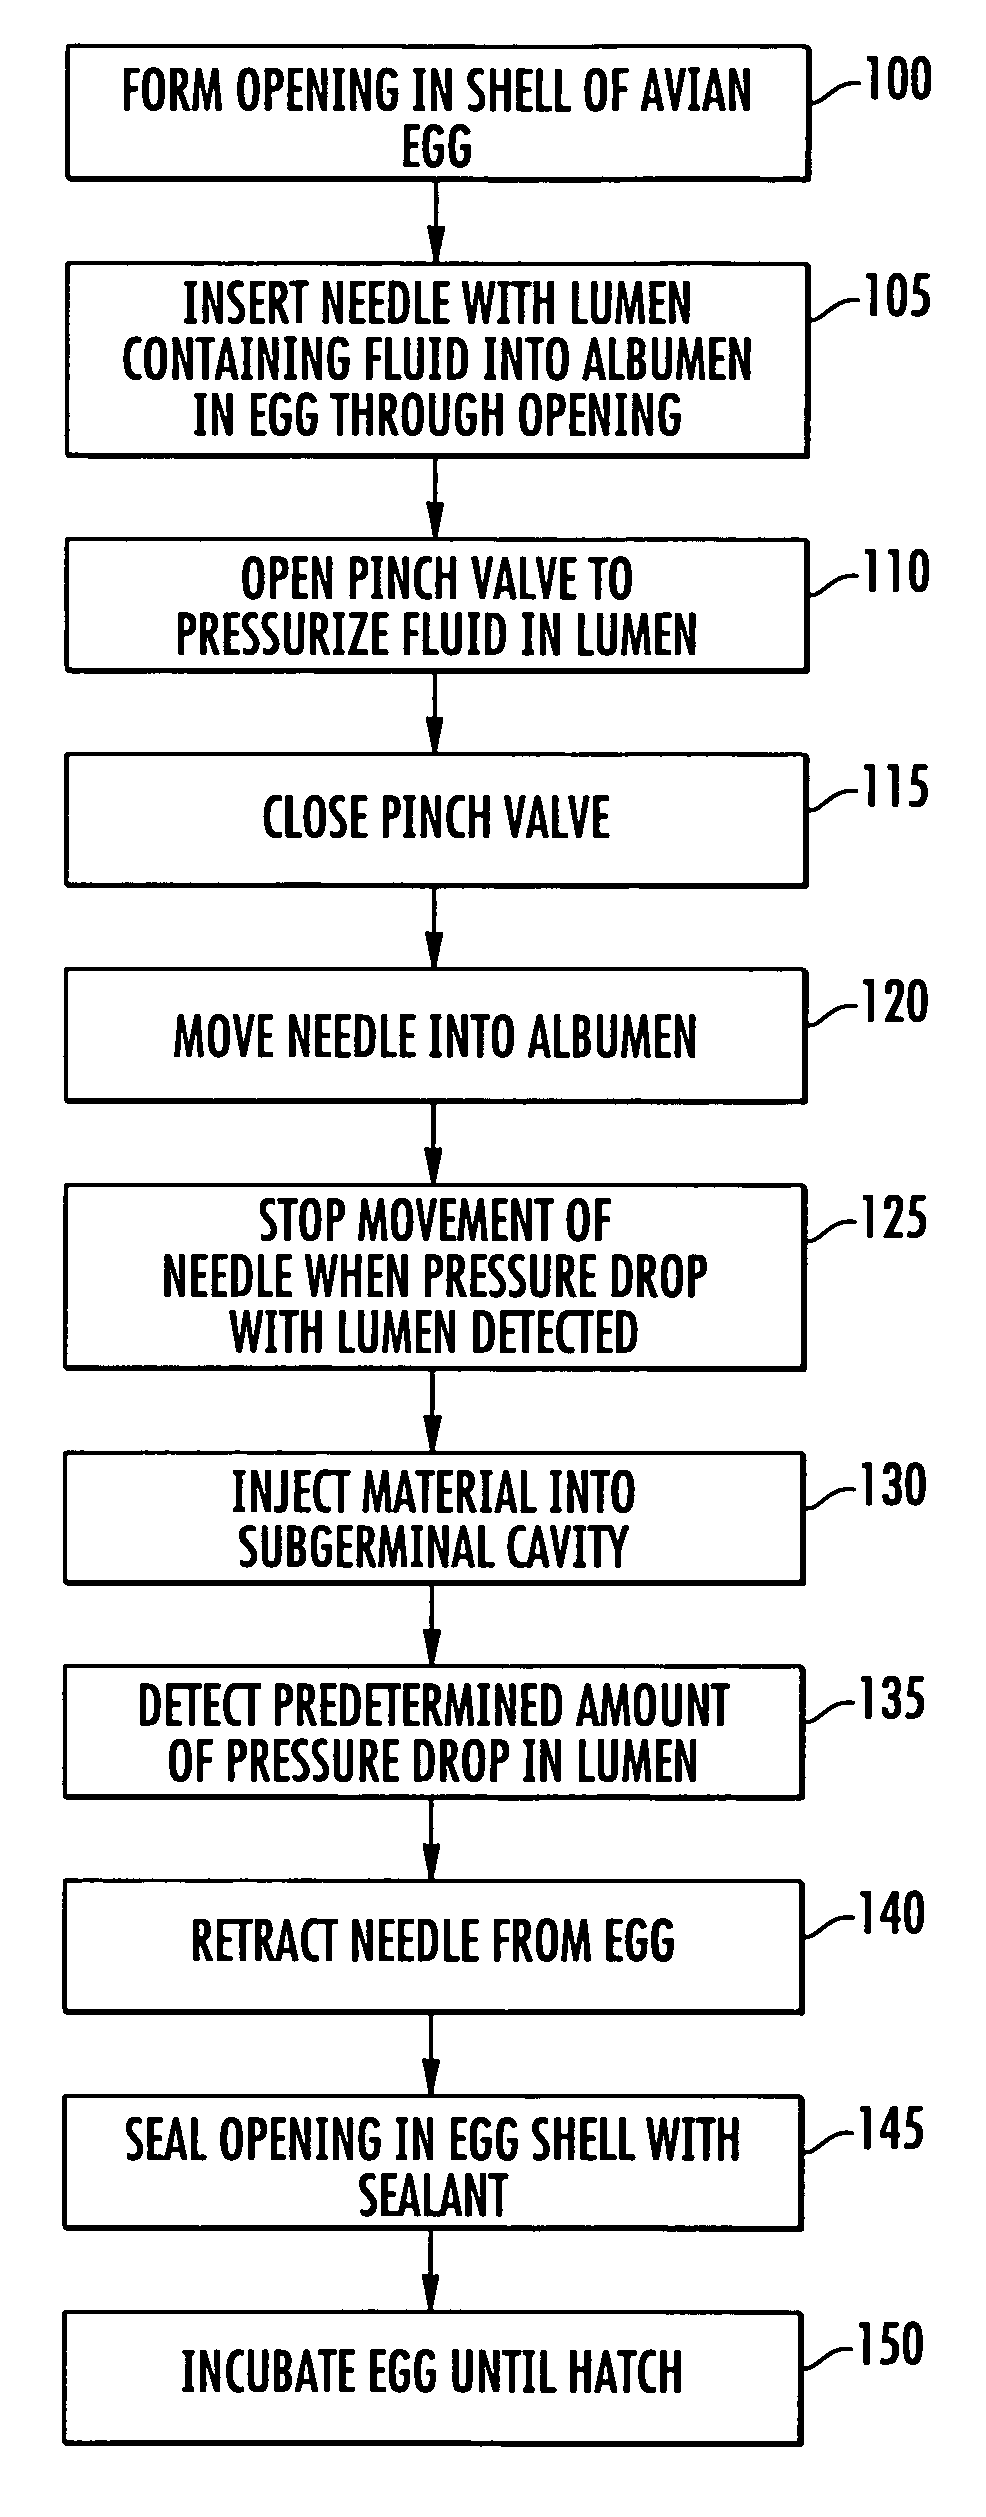 Methods and apparatus for accurately positioning a device within the subgerminal cavity of avian eggs